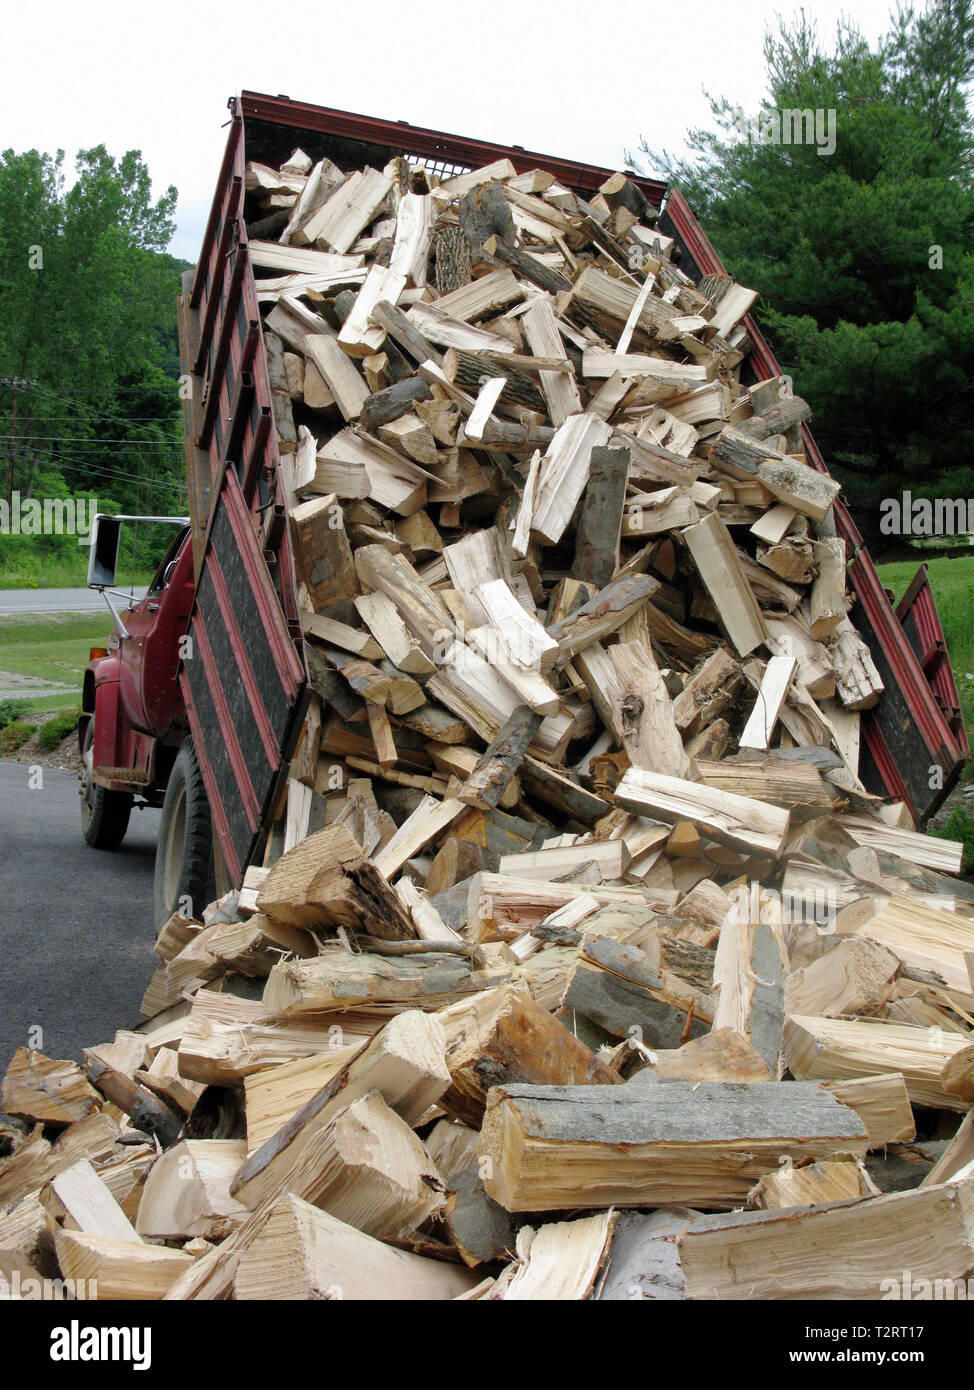 4 cords of split firewood being dumped in a Vermont driveway Stock Photo -  Alamy